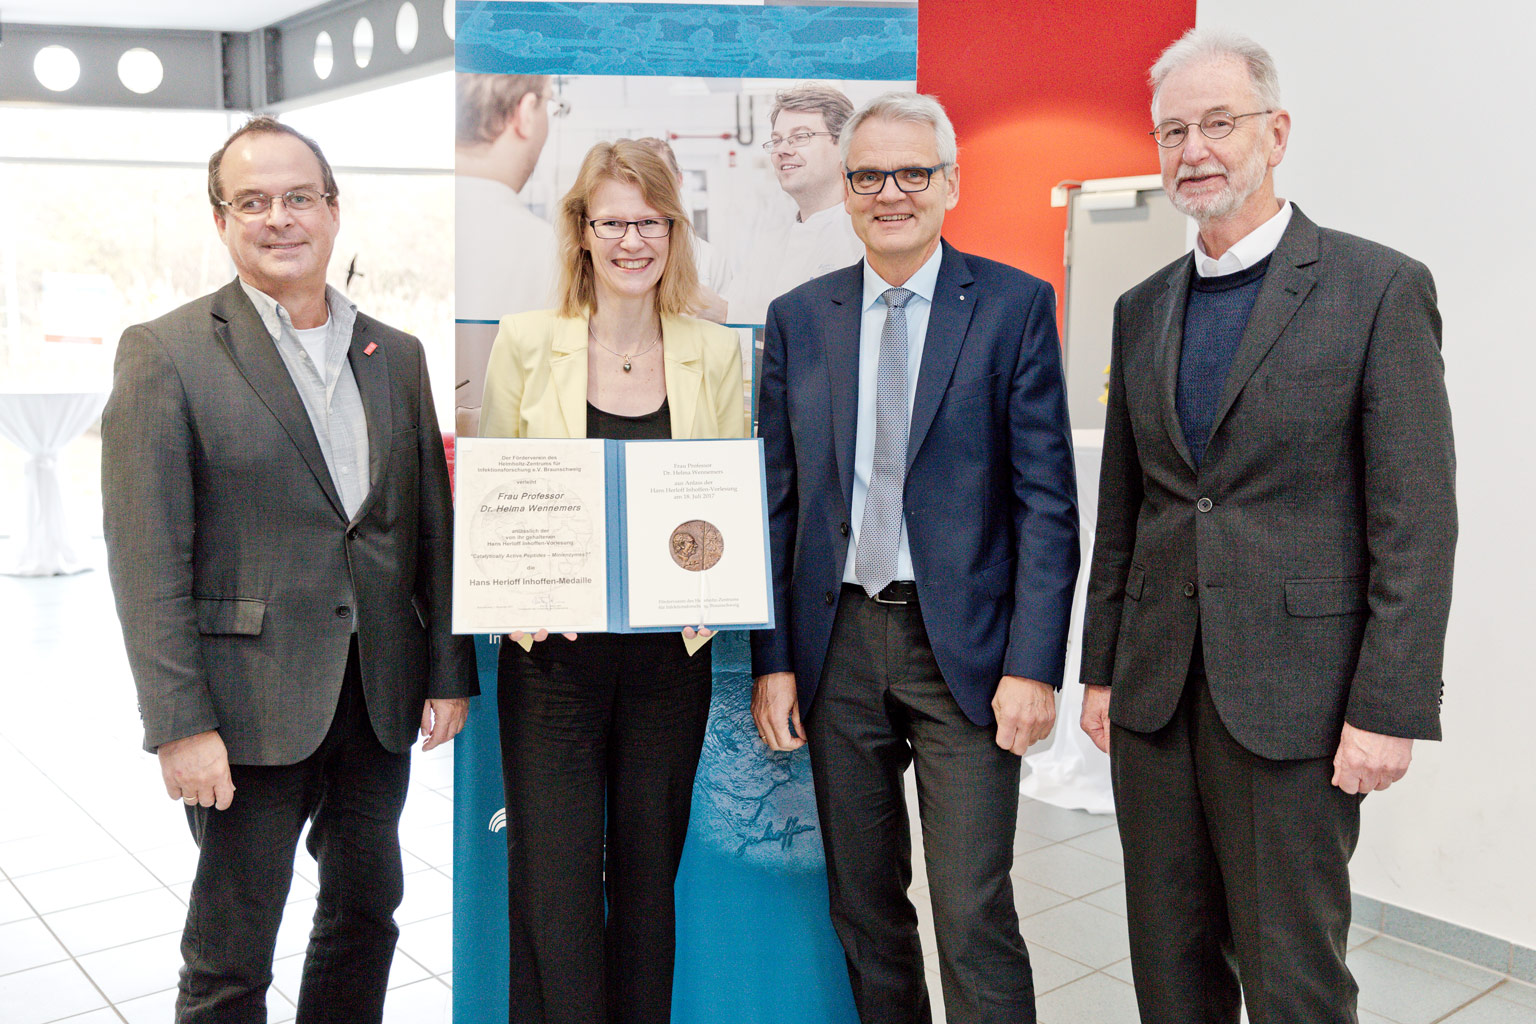 Enlarged view: Prof. Wennemers receives the Inhoffen Medal 2017